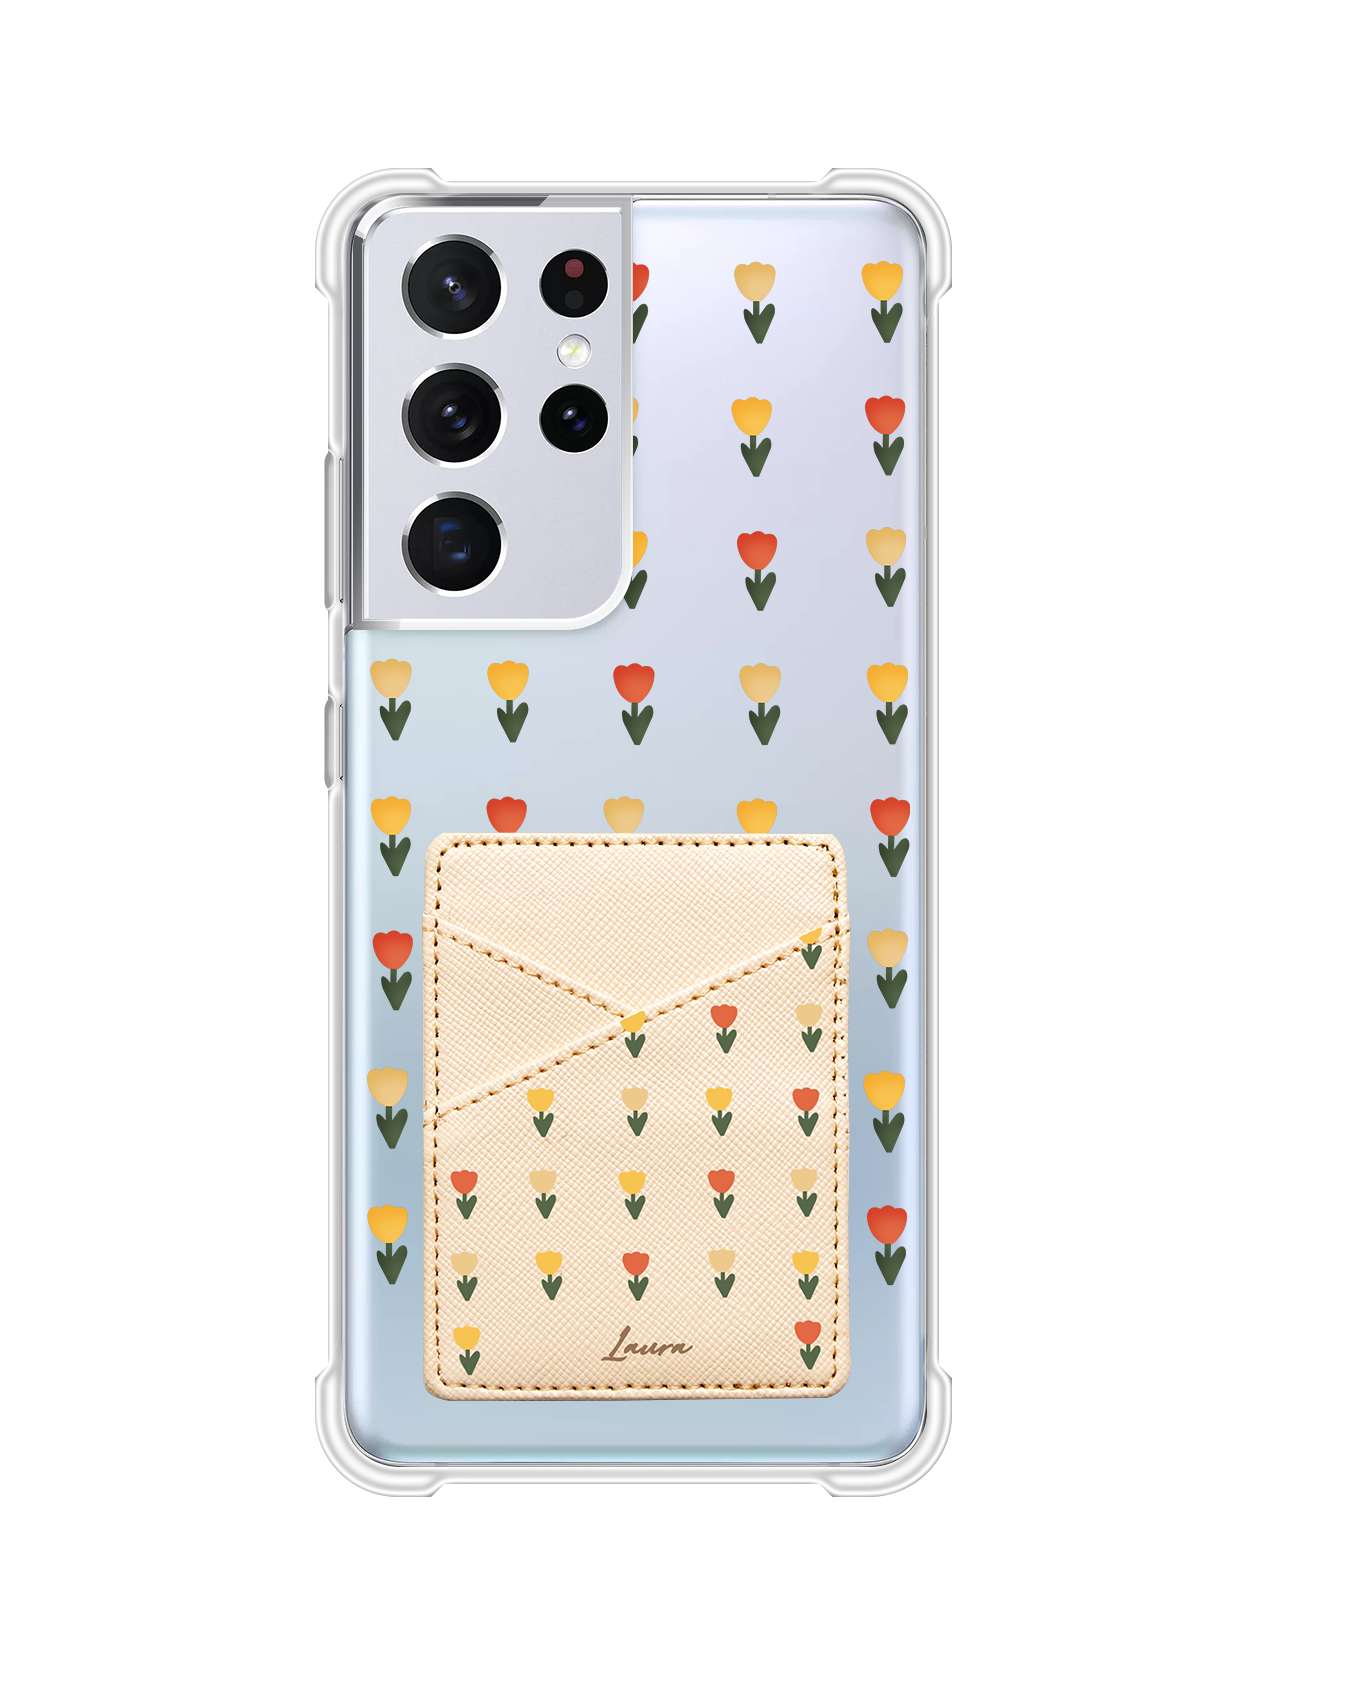 Android Phone Wallet Case - Tulip Fever 1.0